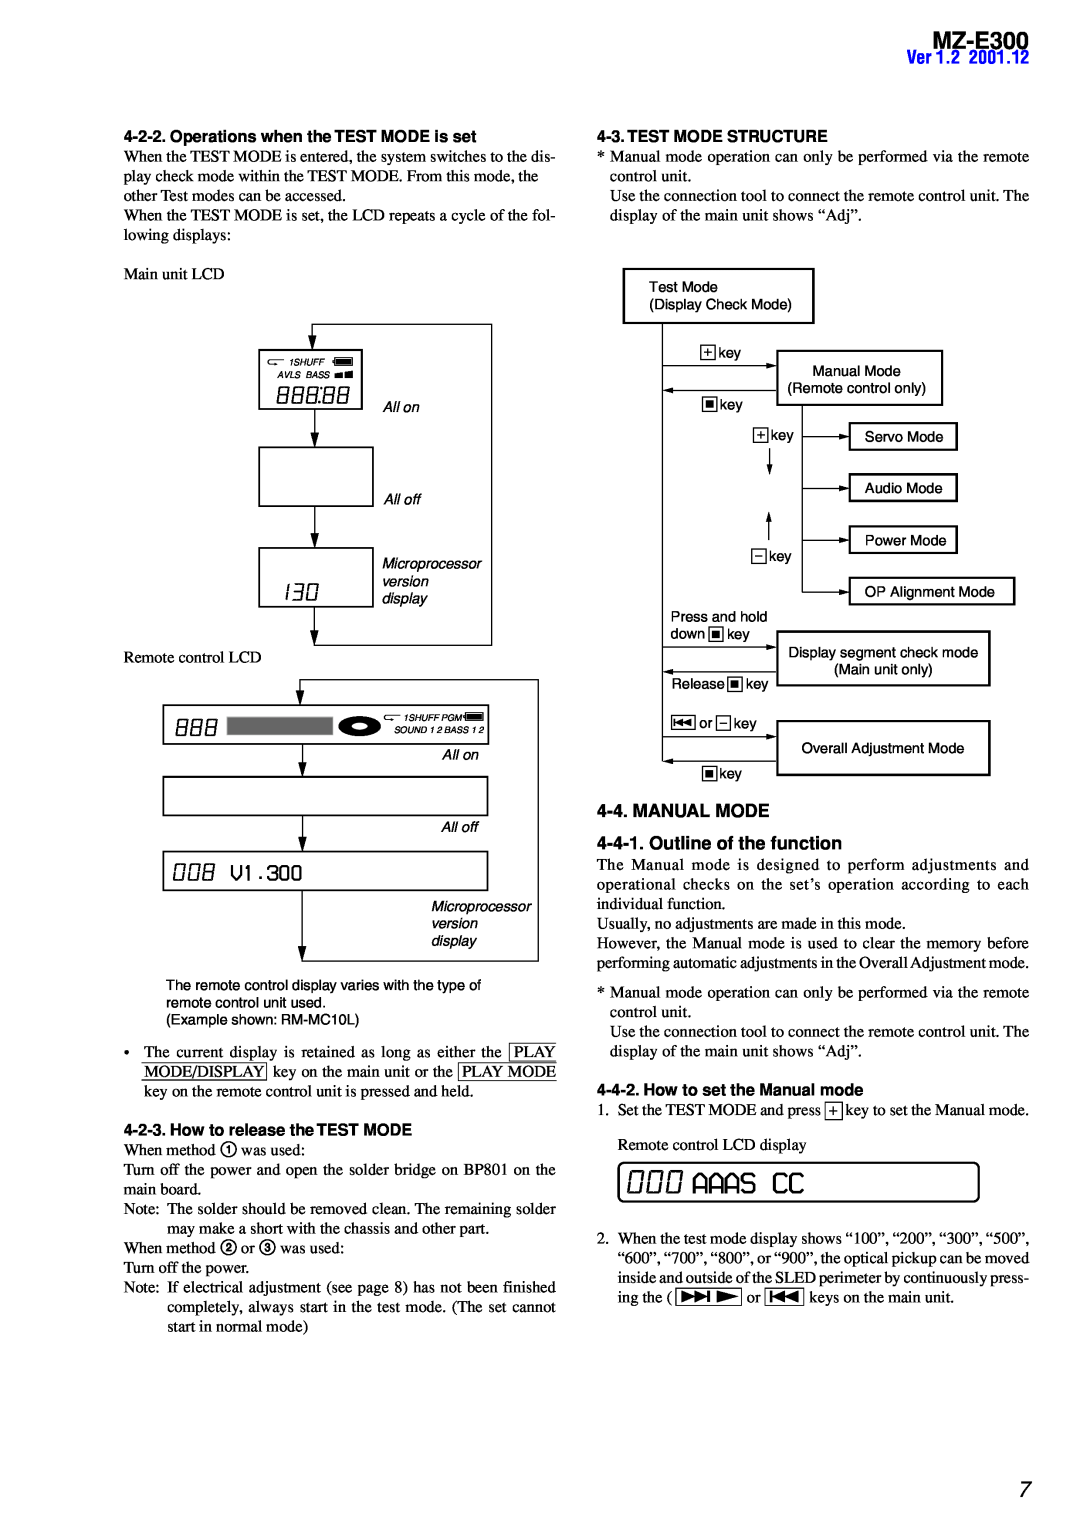 Sony MZ-300 Aaas Cc, Ver, MANUAL MODE 4-4-1.Outline of the function, Operations when the TEST MODE is set, MZ-E300, 888 